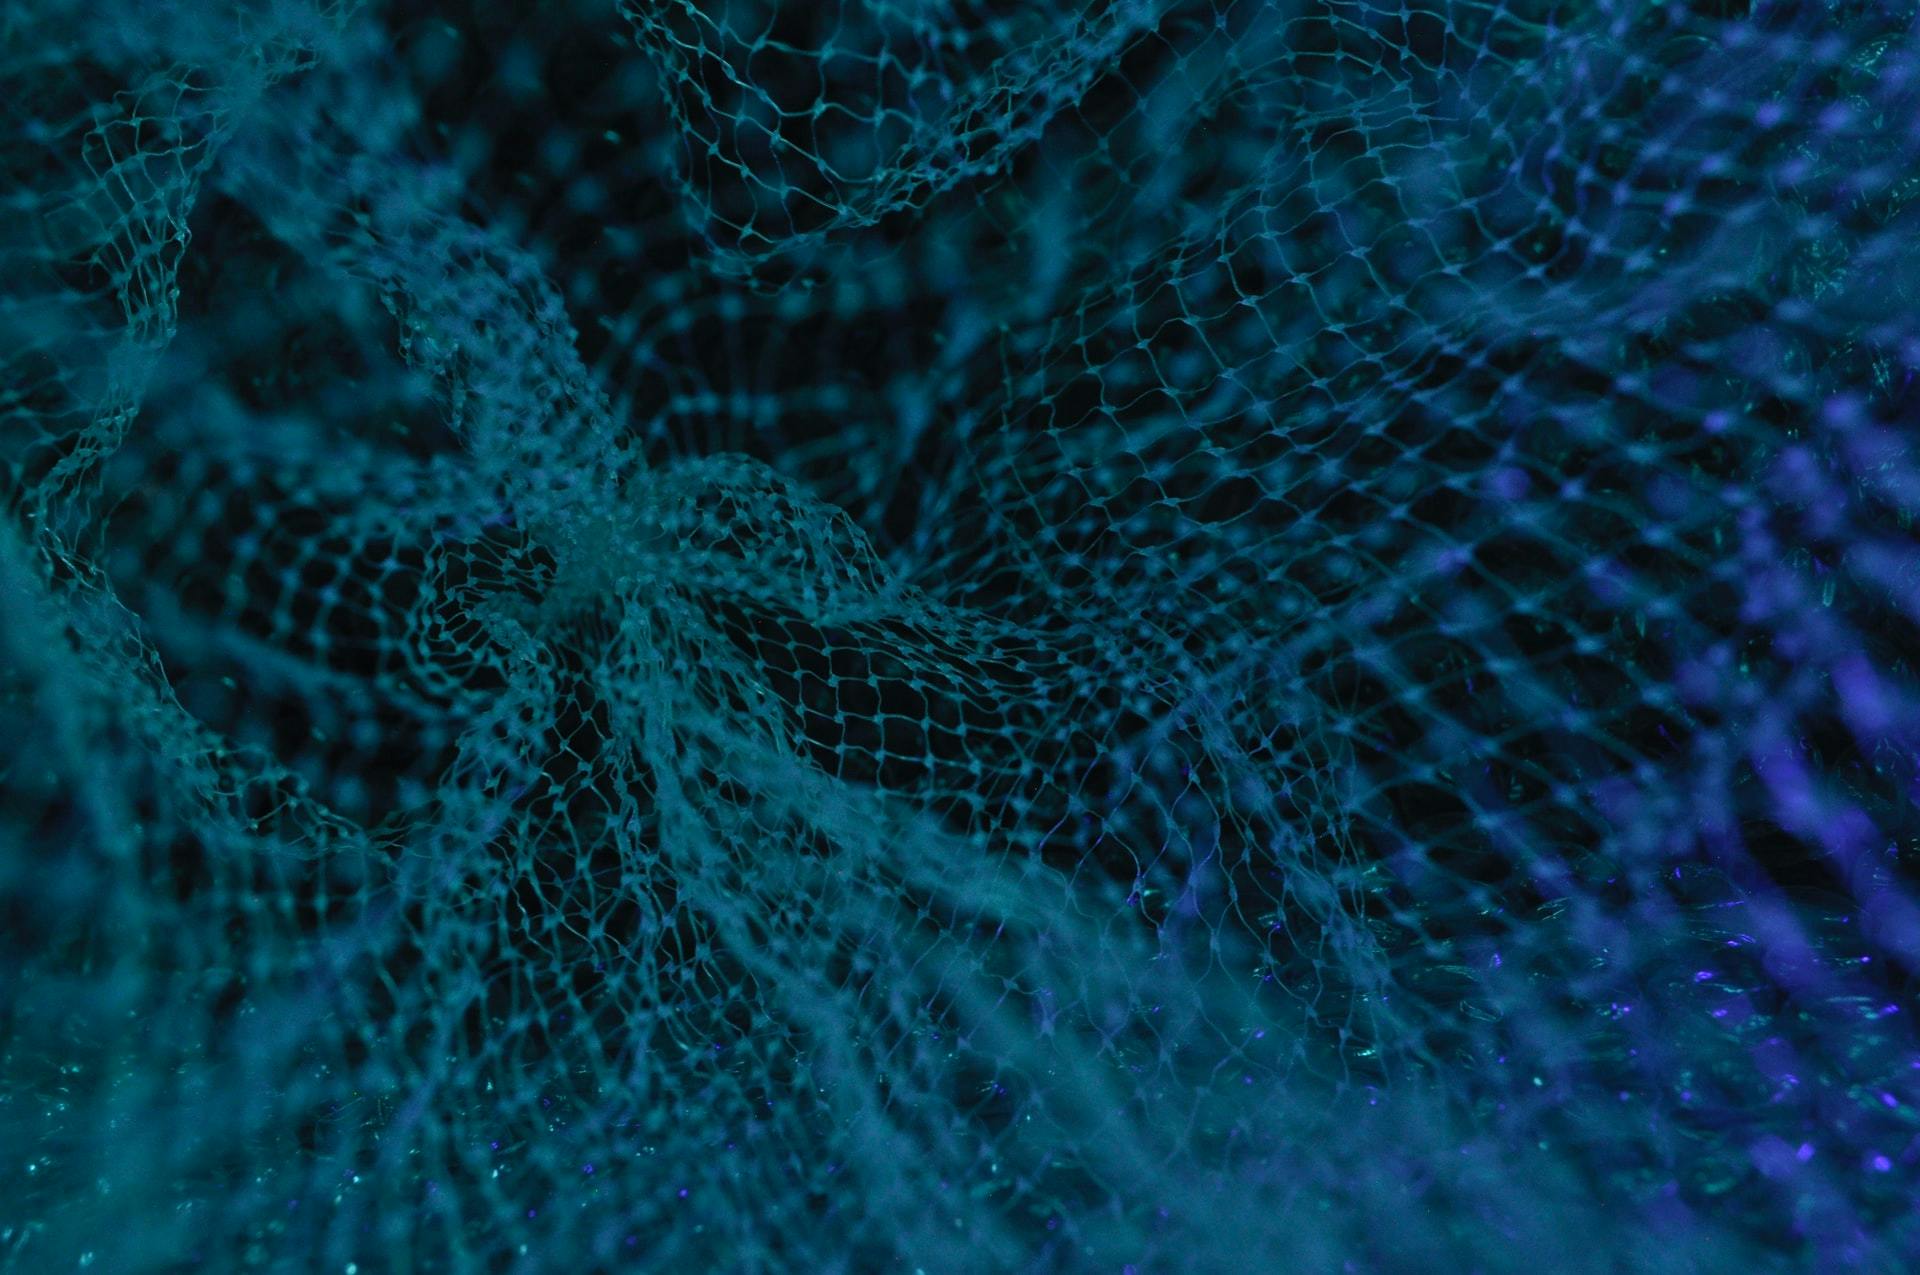 A mesh of blue plastic forming what looks like a 3D surface with a black background